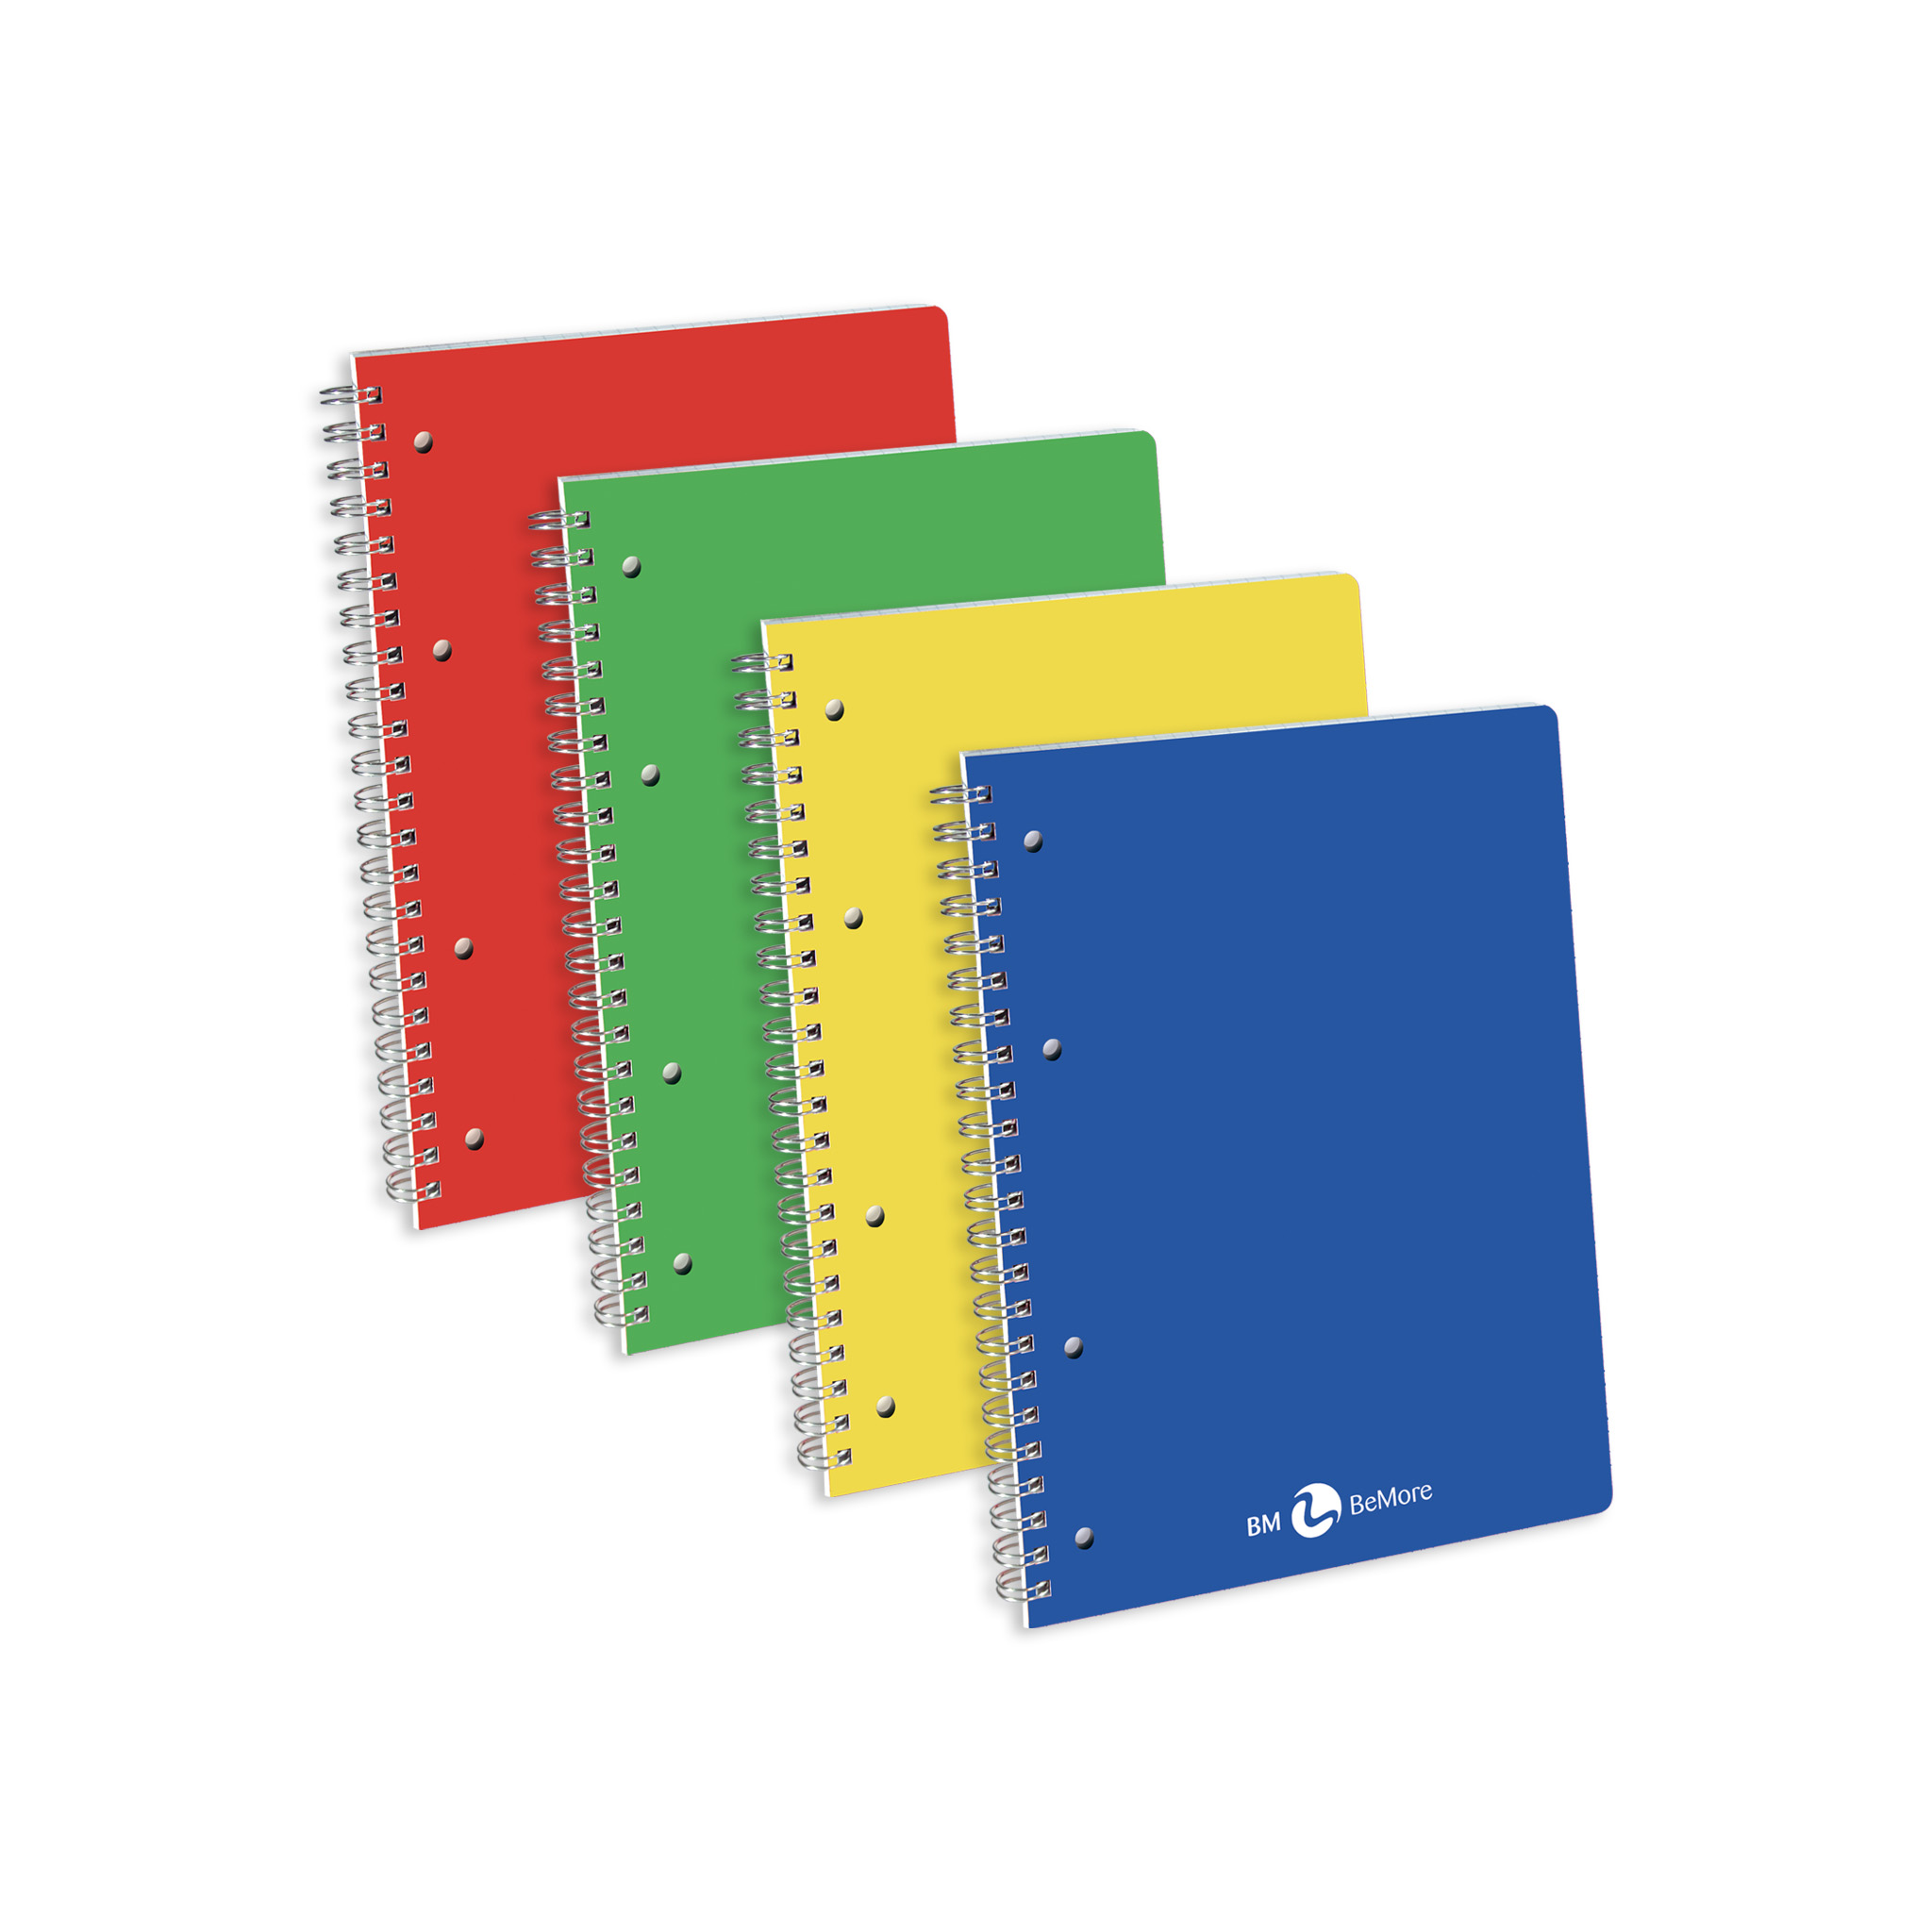 A5 spiral-bound PPL punched with microperforations - 5 assorted pieces